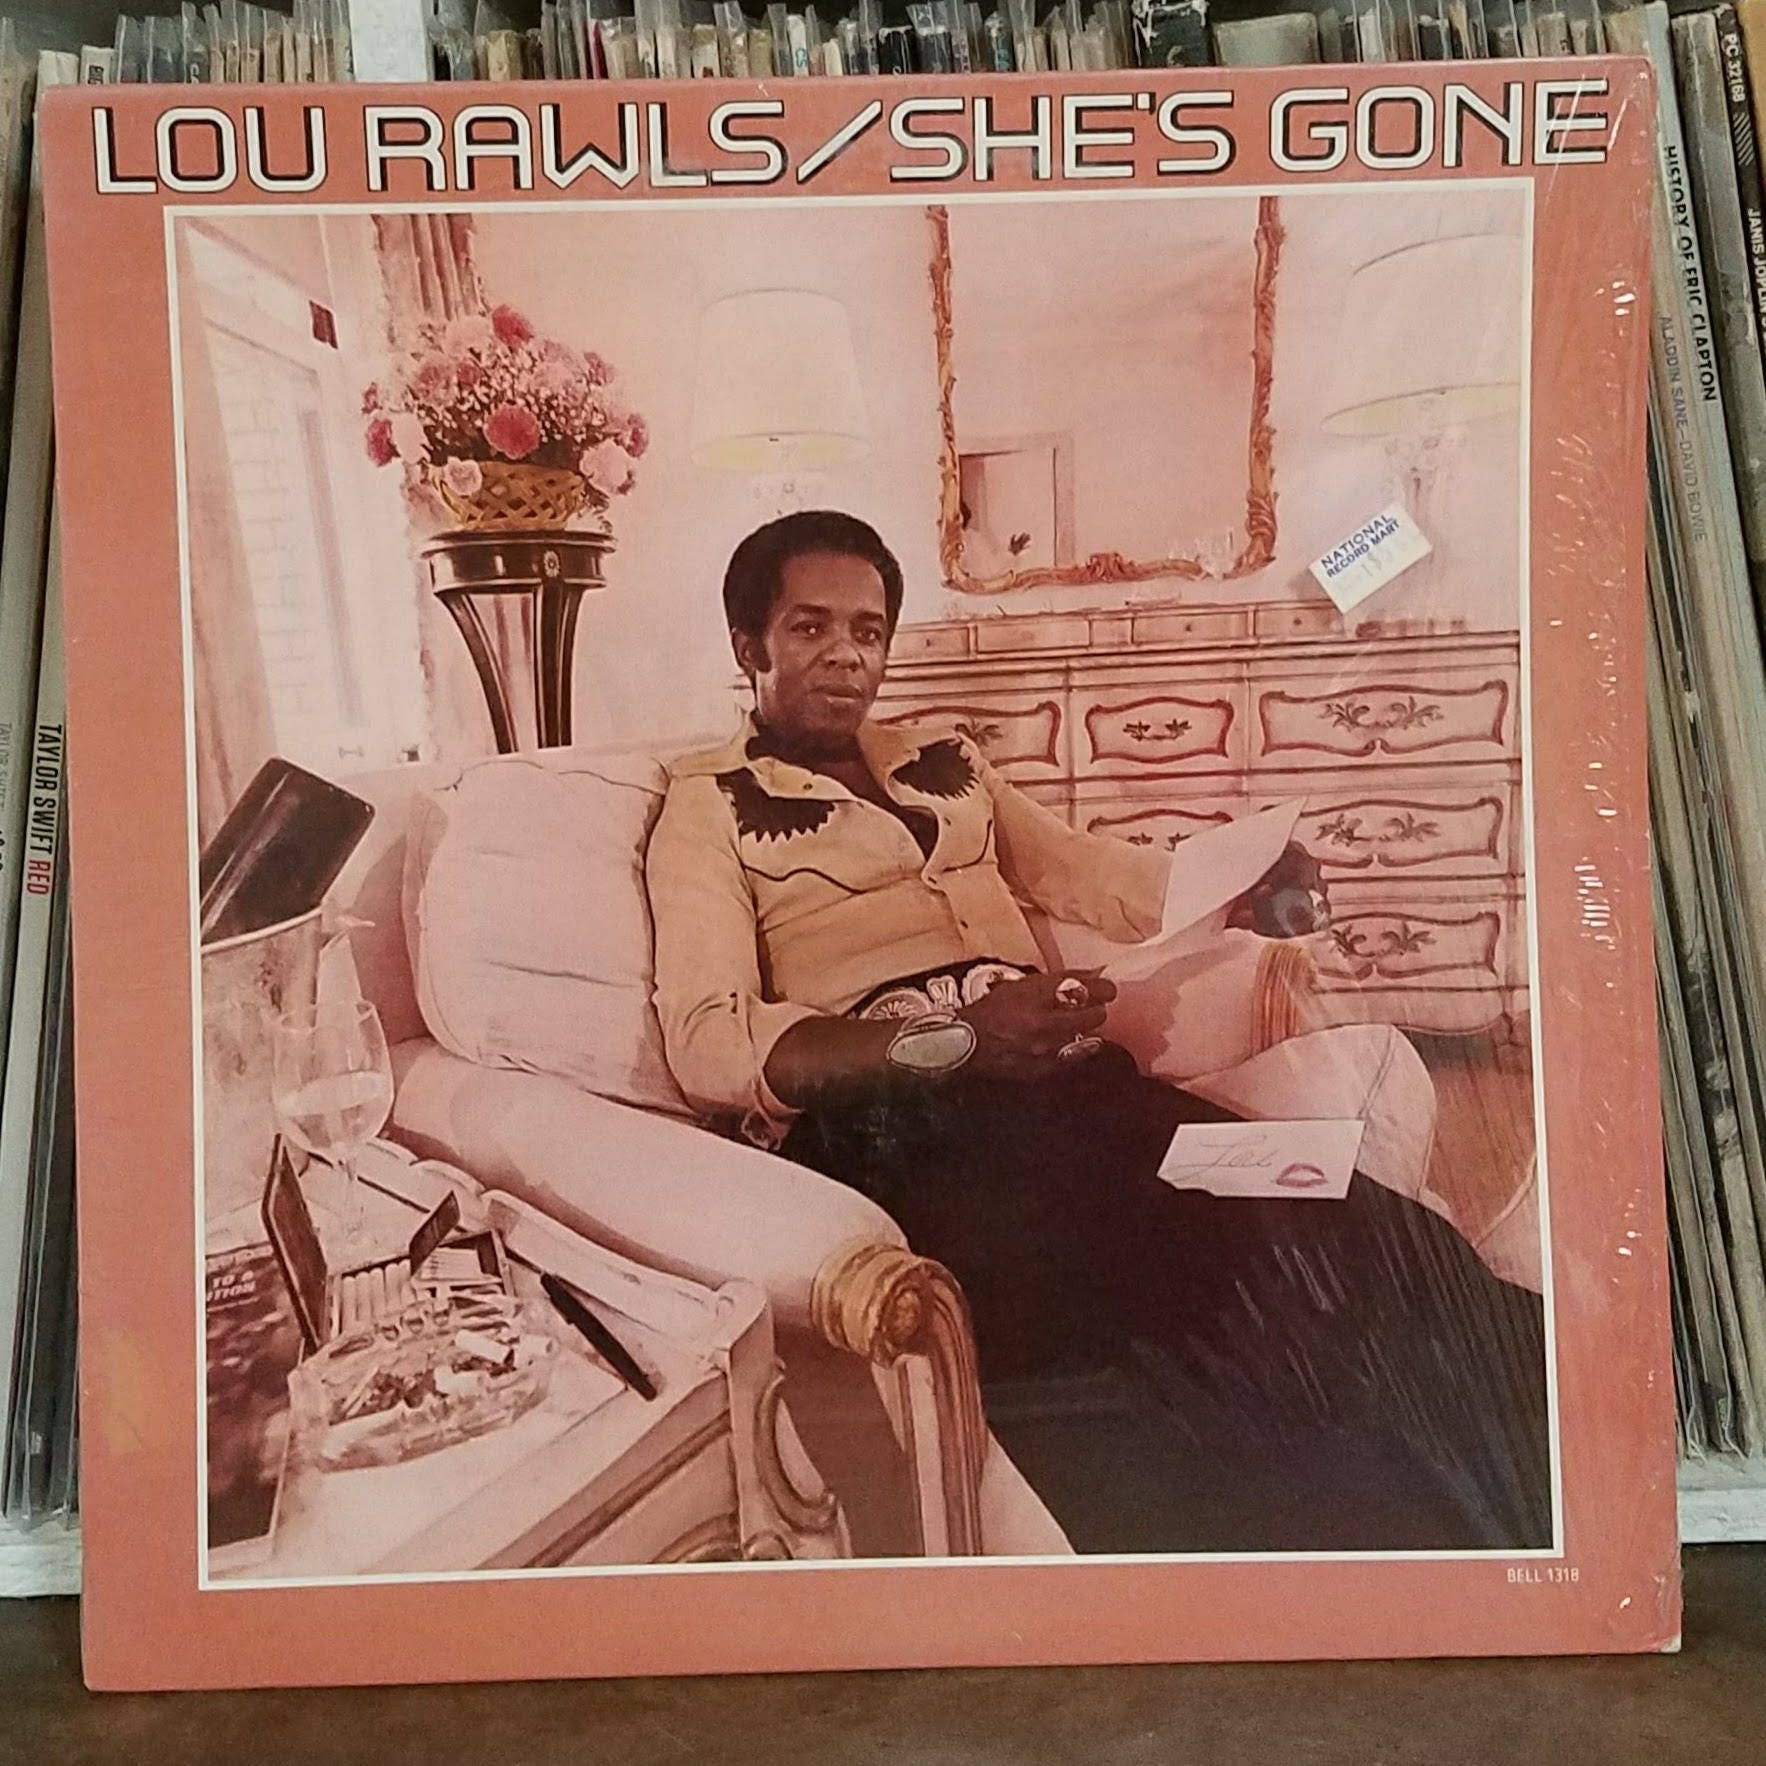 Gone flac. Lou Rawls - shes gone. Lou Rawls 1974 `she's gone`. Lou Rawls 2007 `the Essential Lou Rawls`. Lou Rawls 1982 `Now is the time`.